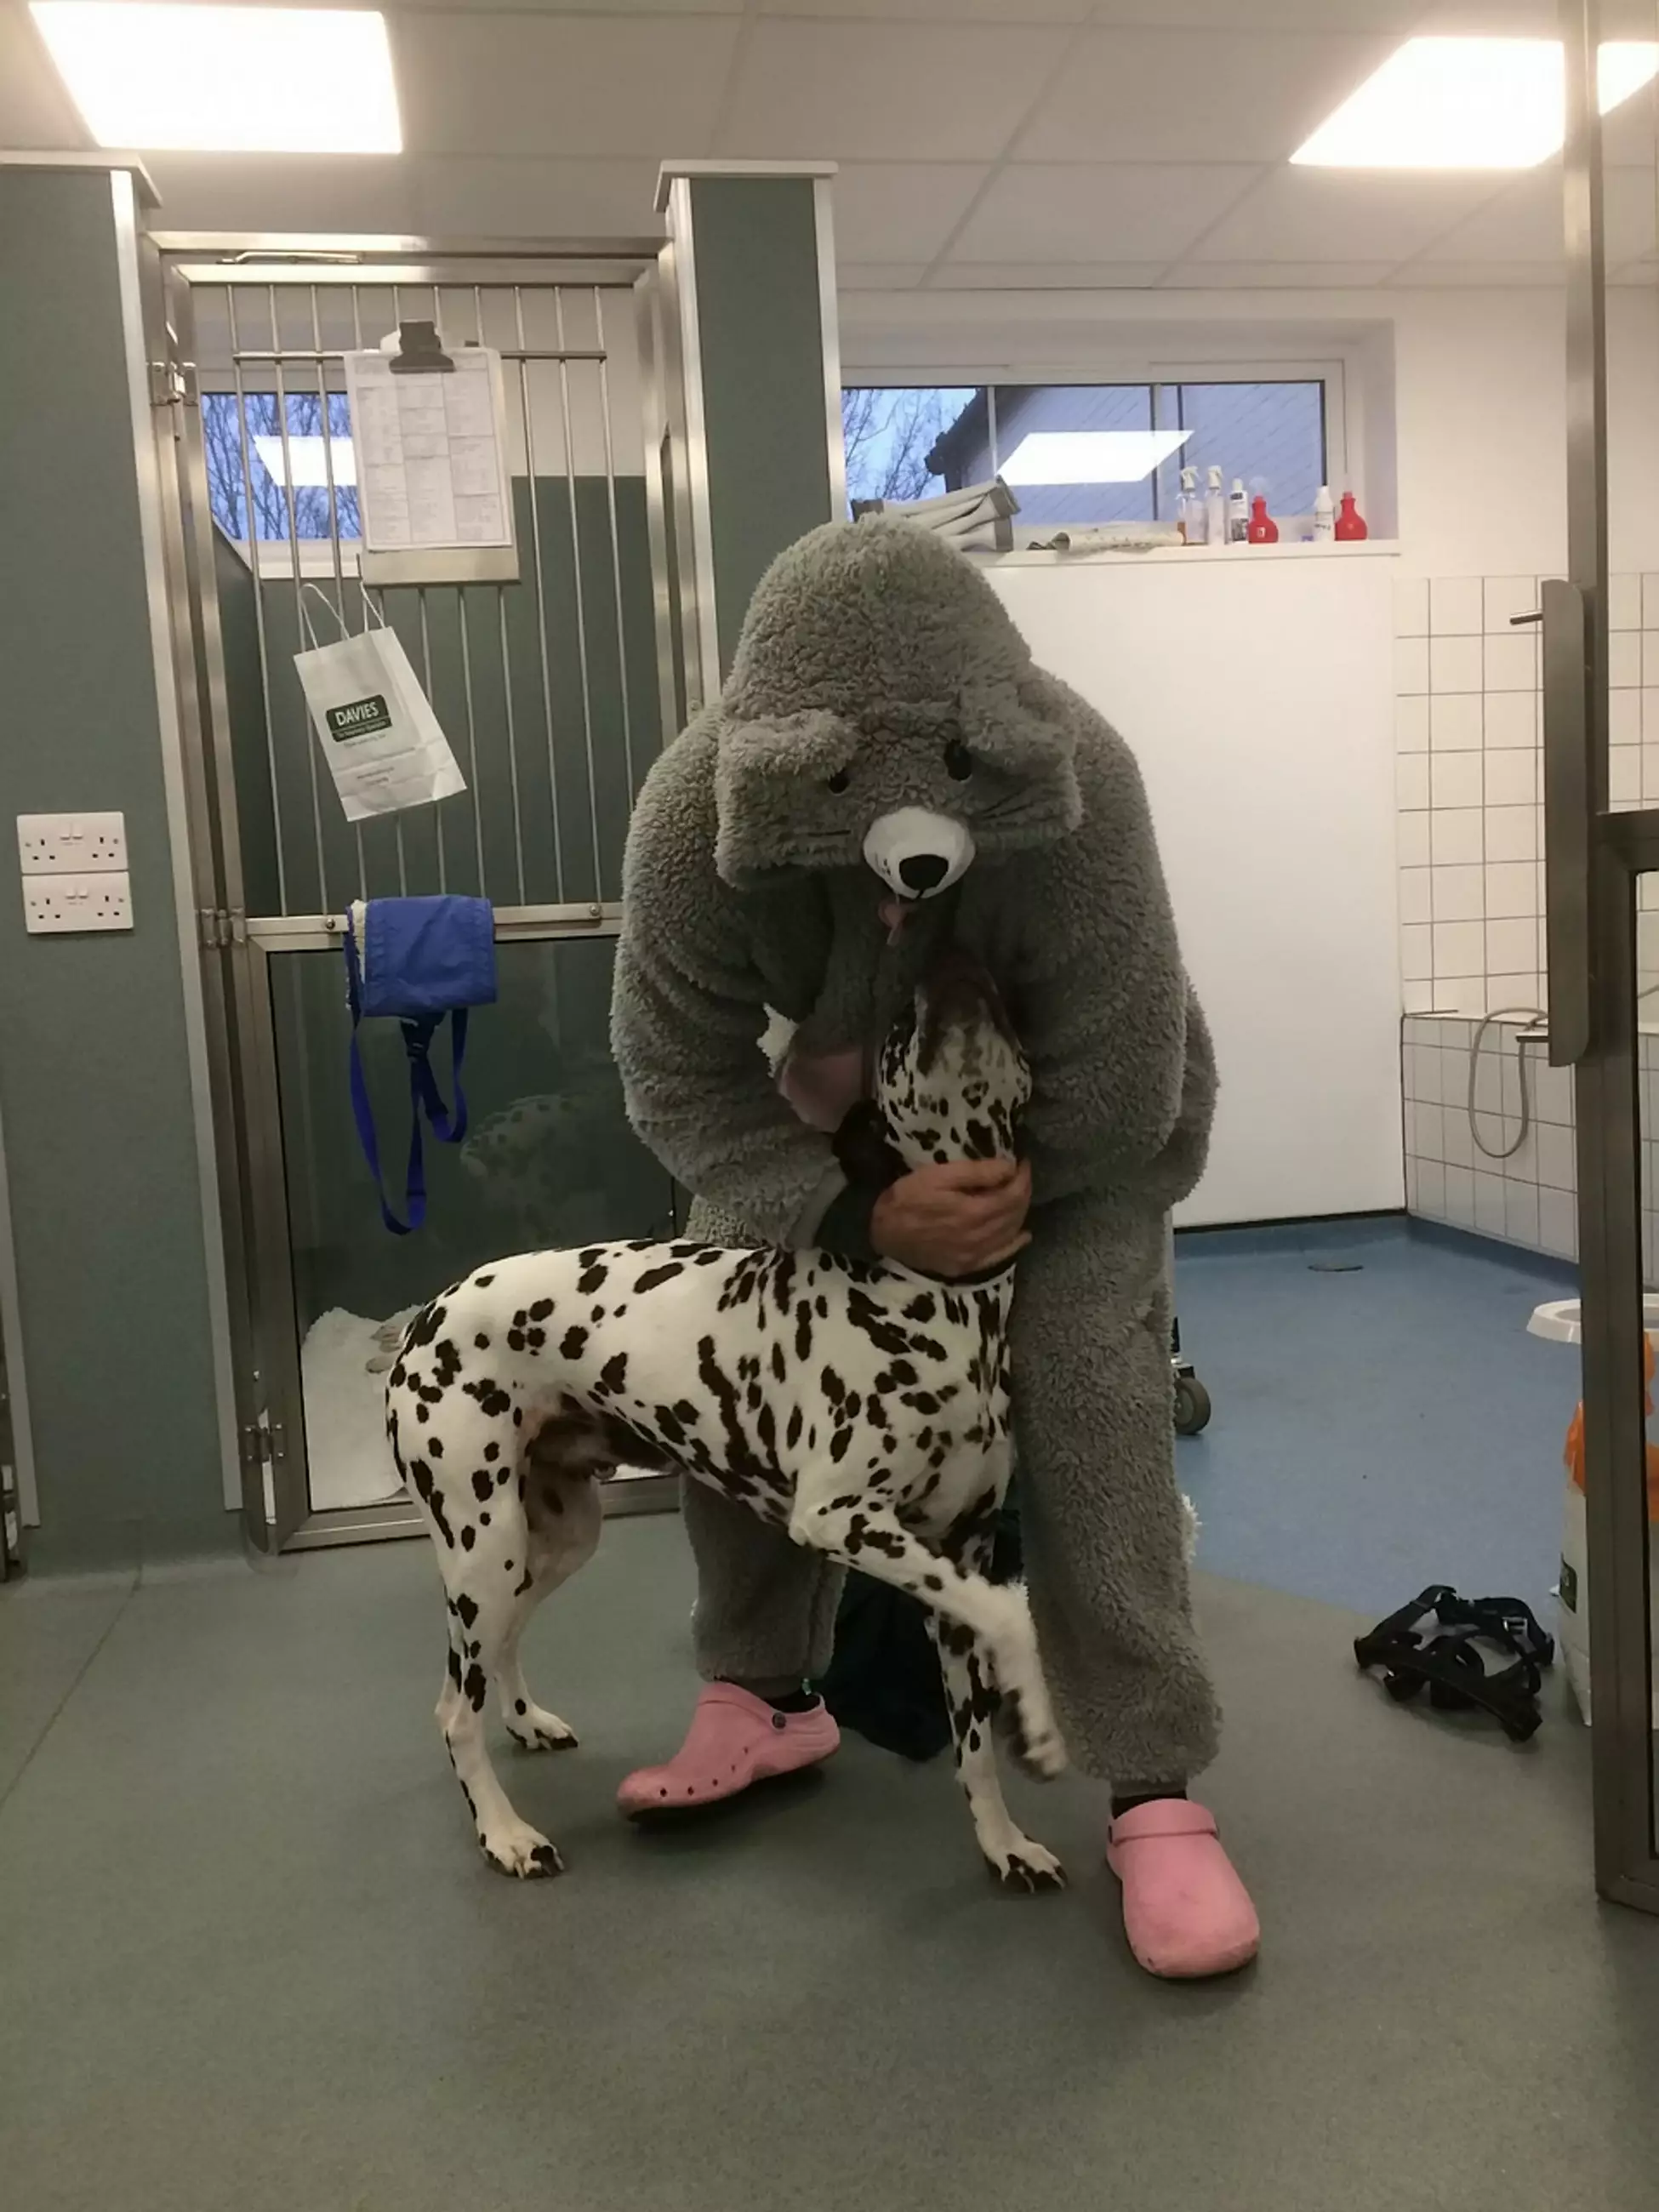 The vet wore a giant mouse costume to soothe nervous dog.